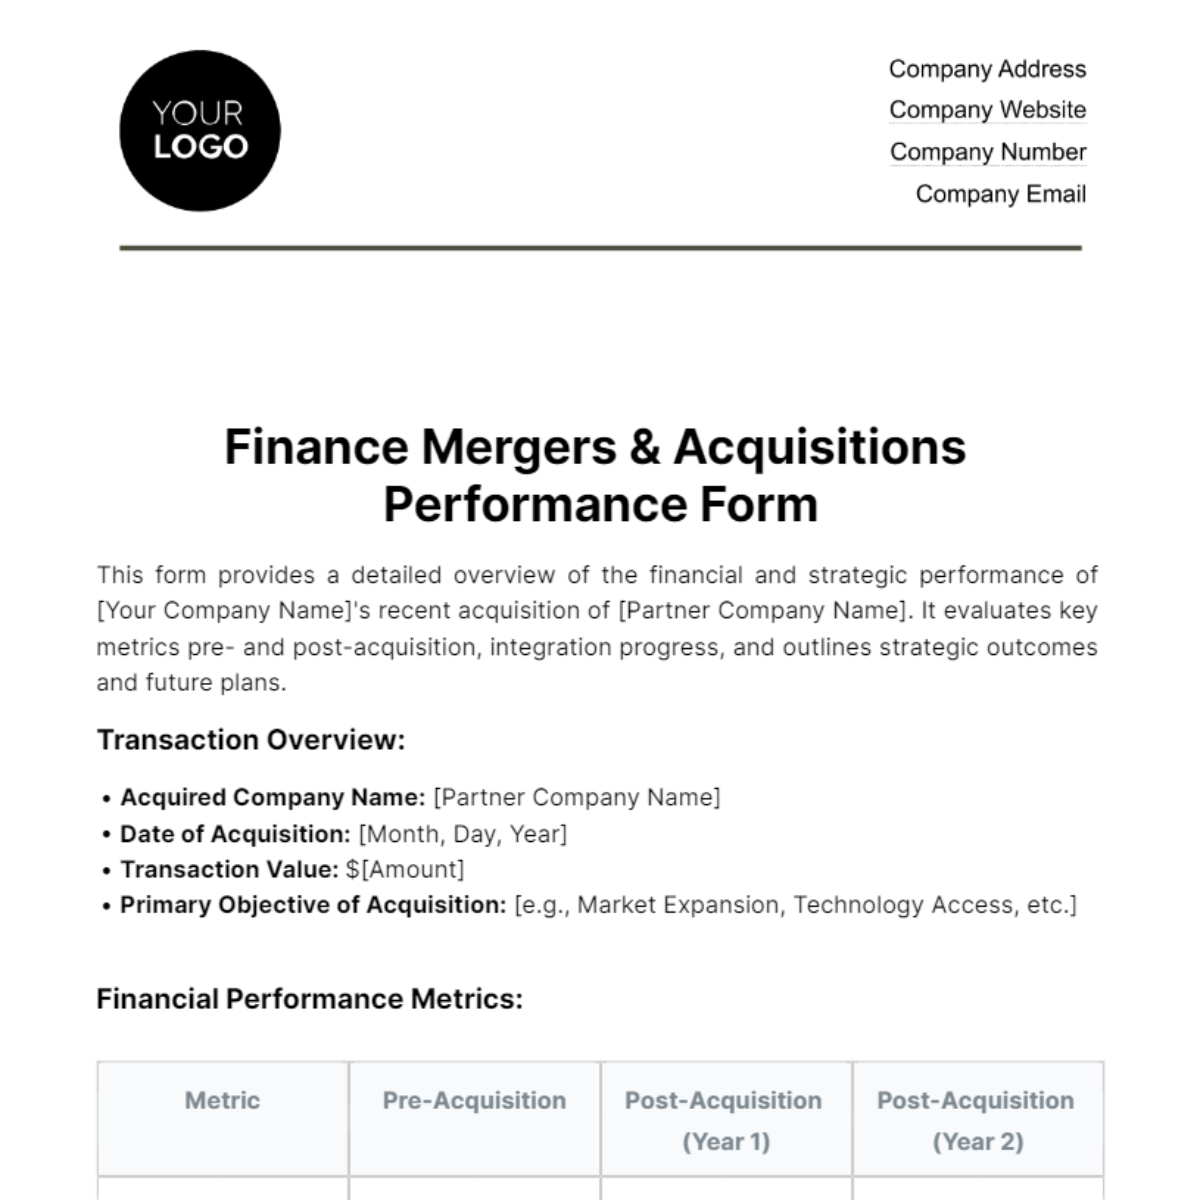 Finance Mergers & Acquisitions Performance Form Template